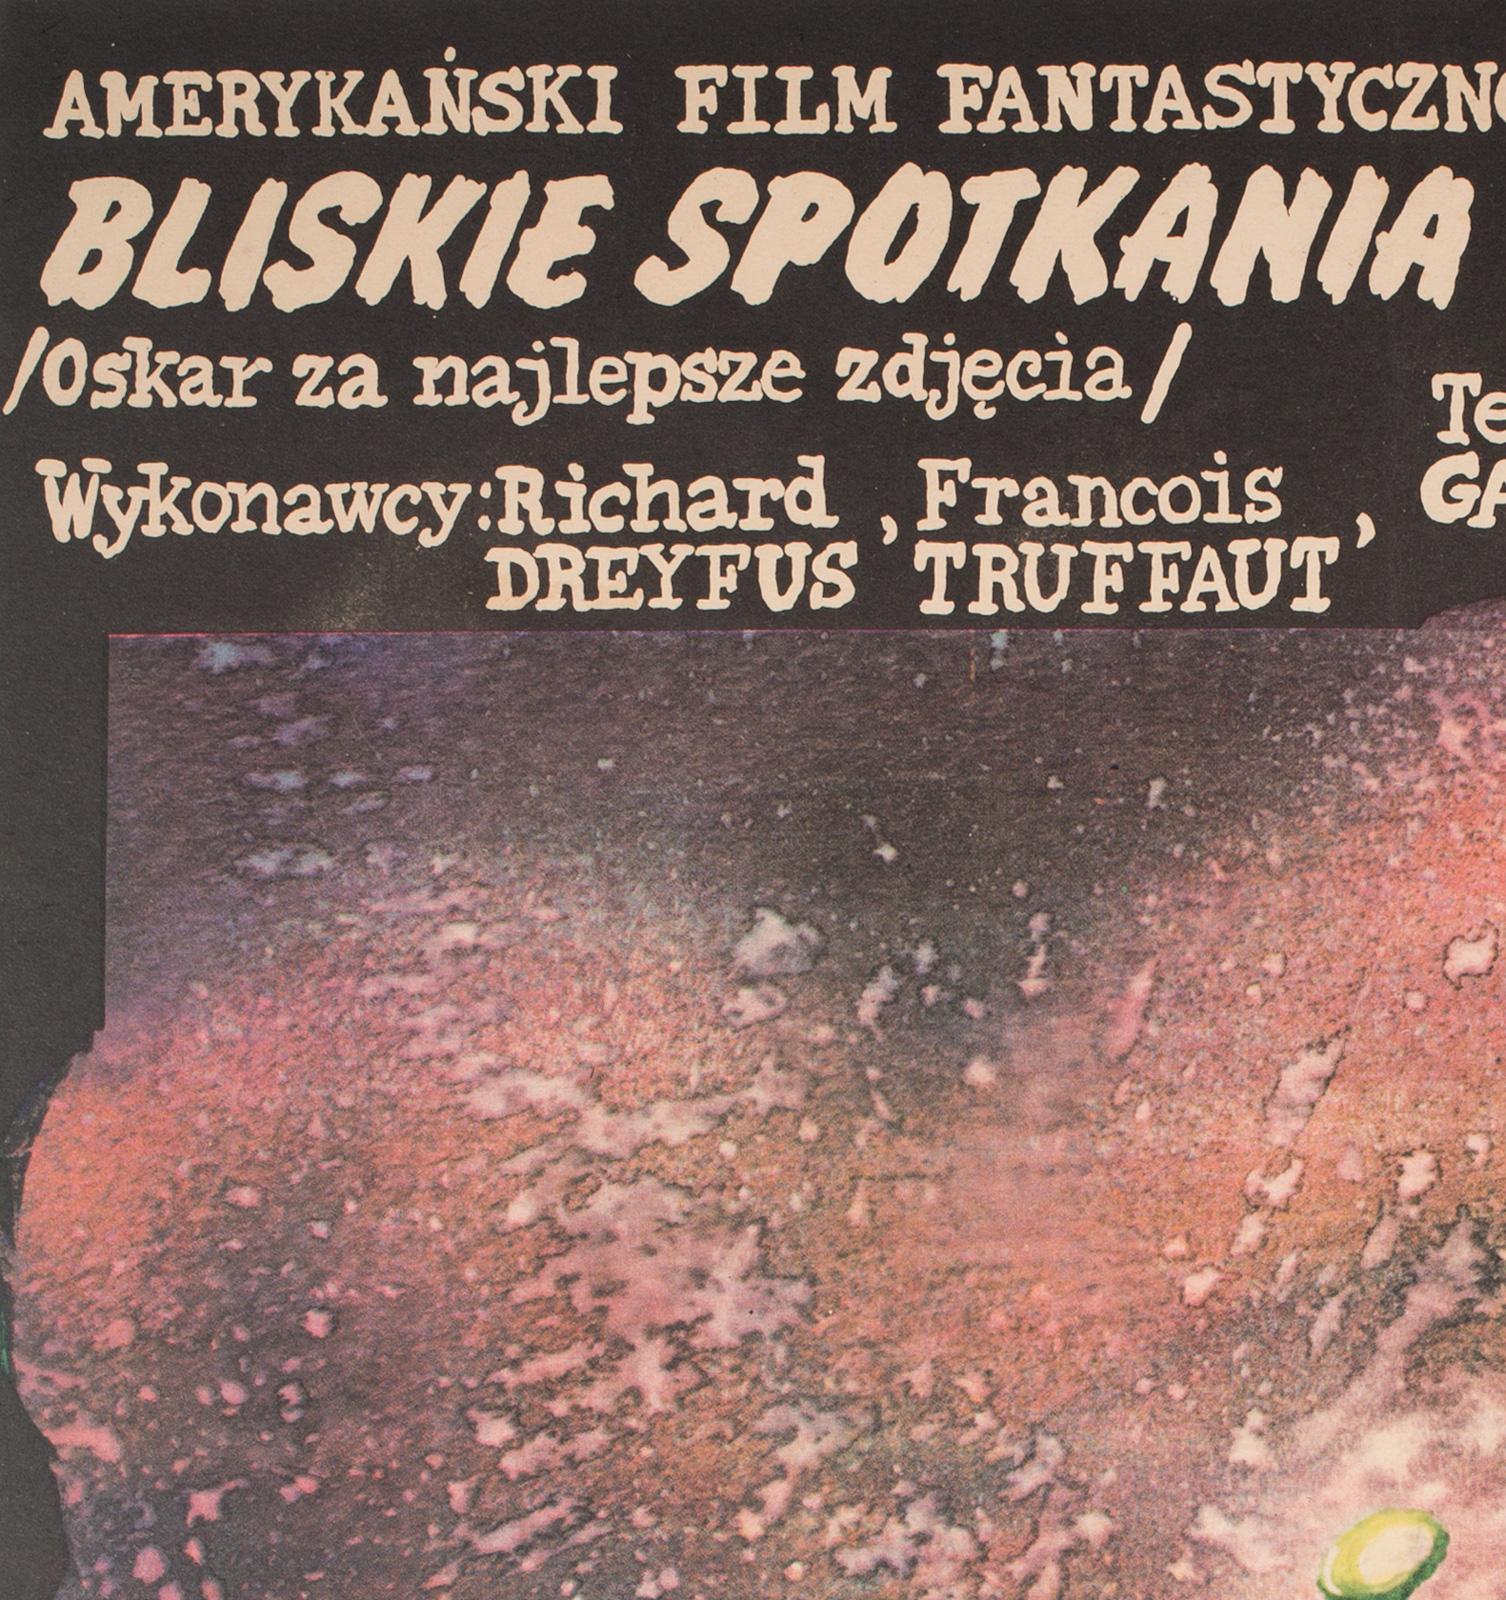 Paper Close Encounters of the Third Kind 1979 Polish Film Poster, Pagowski